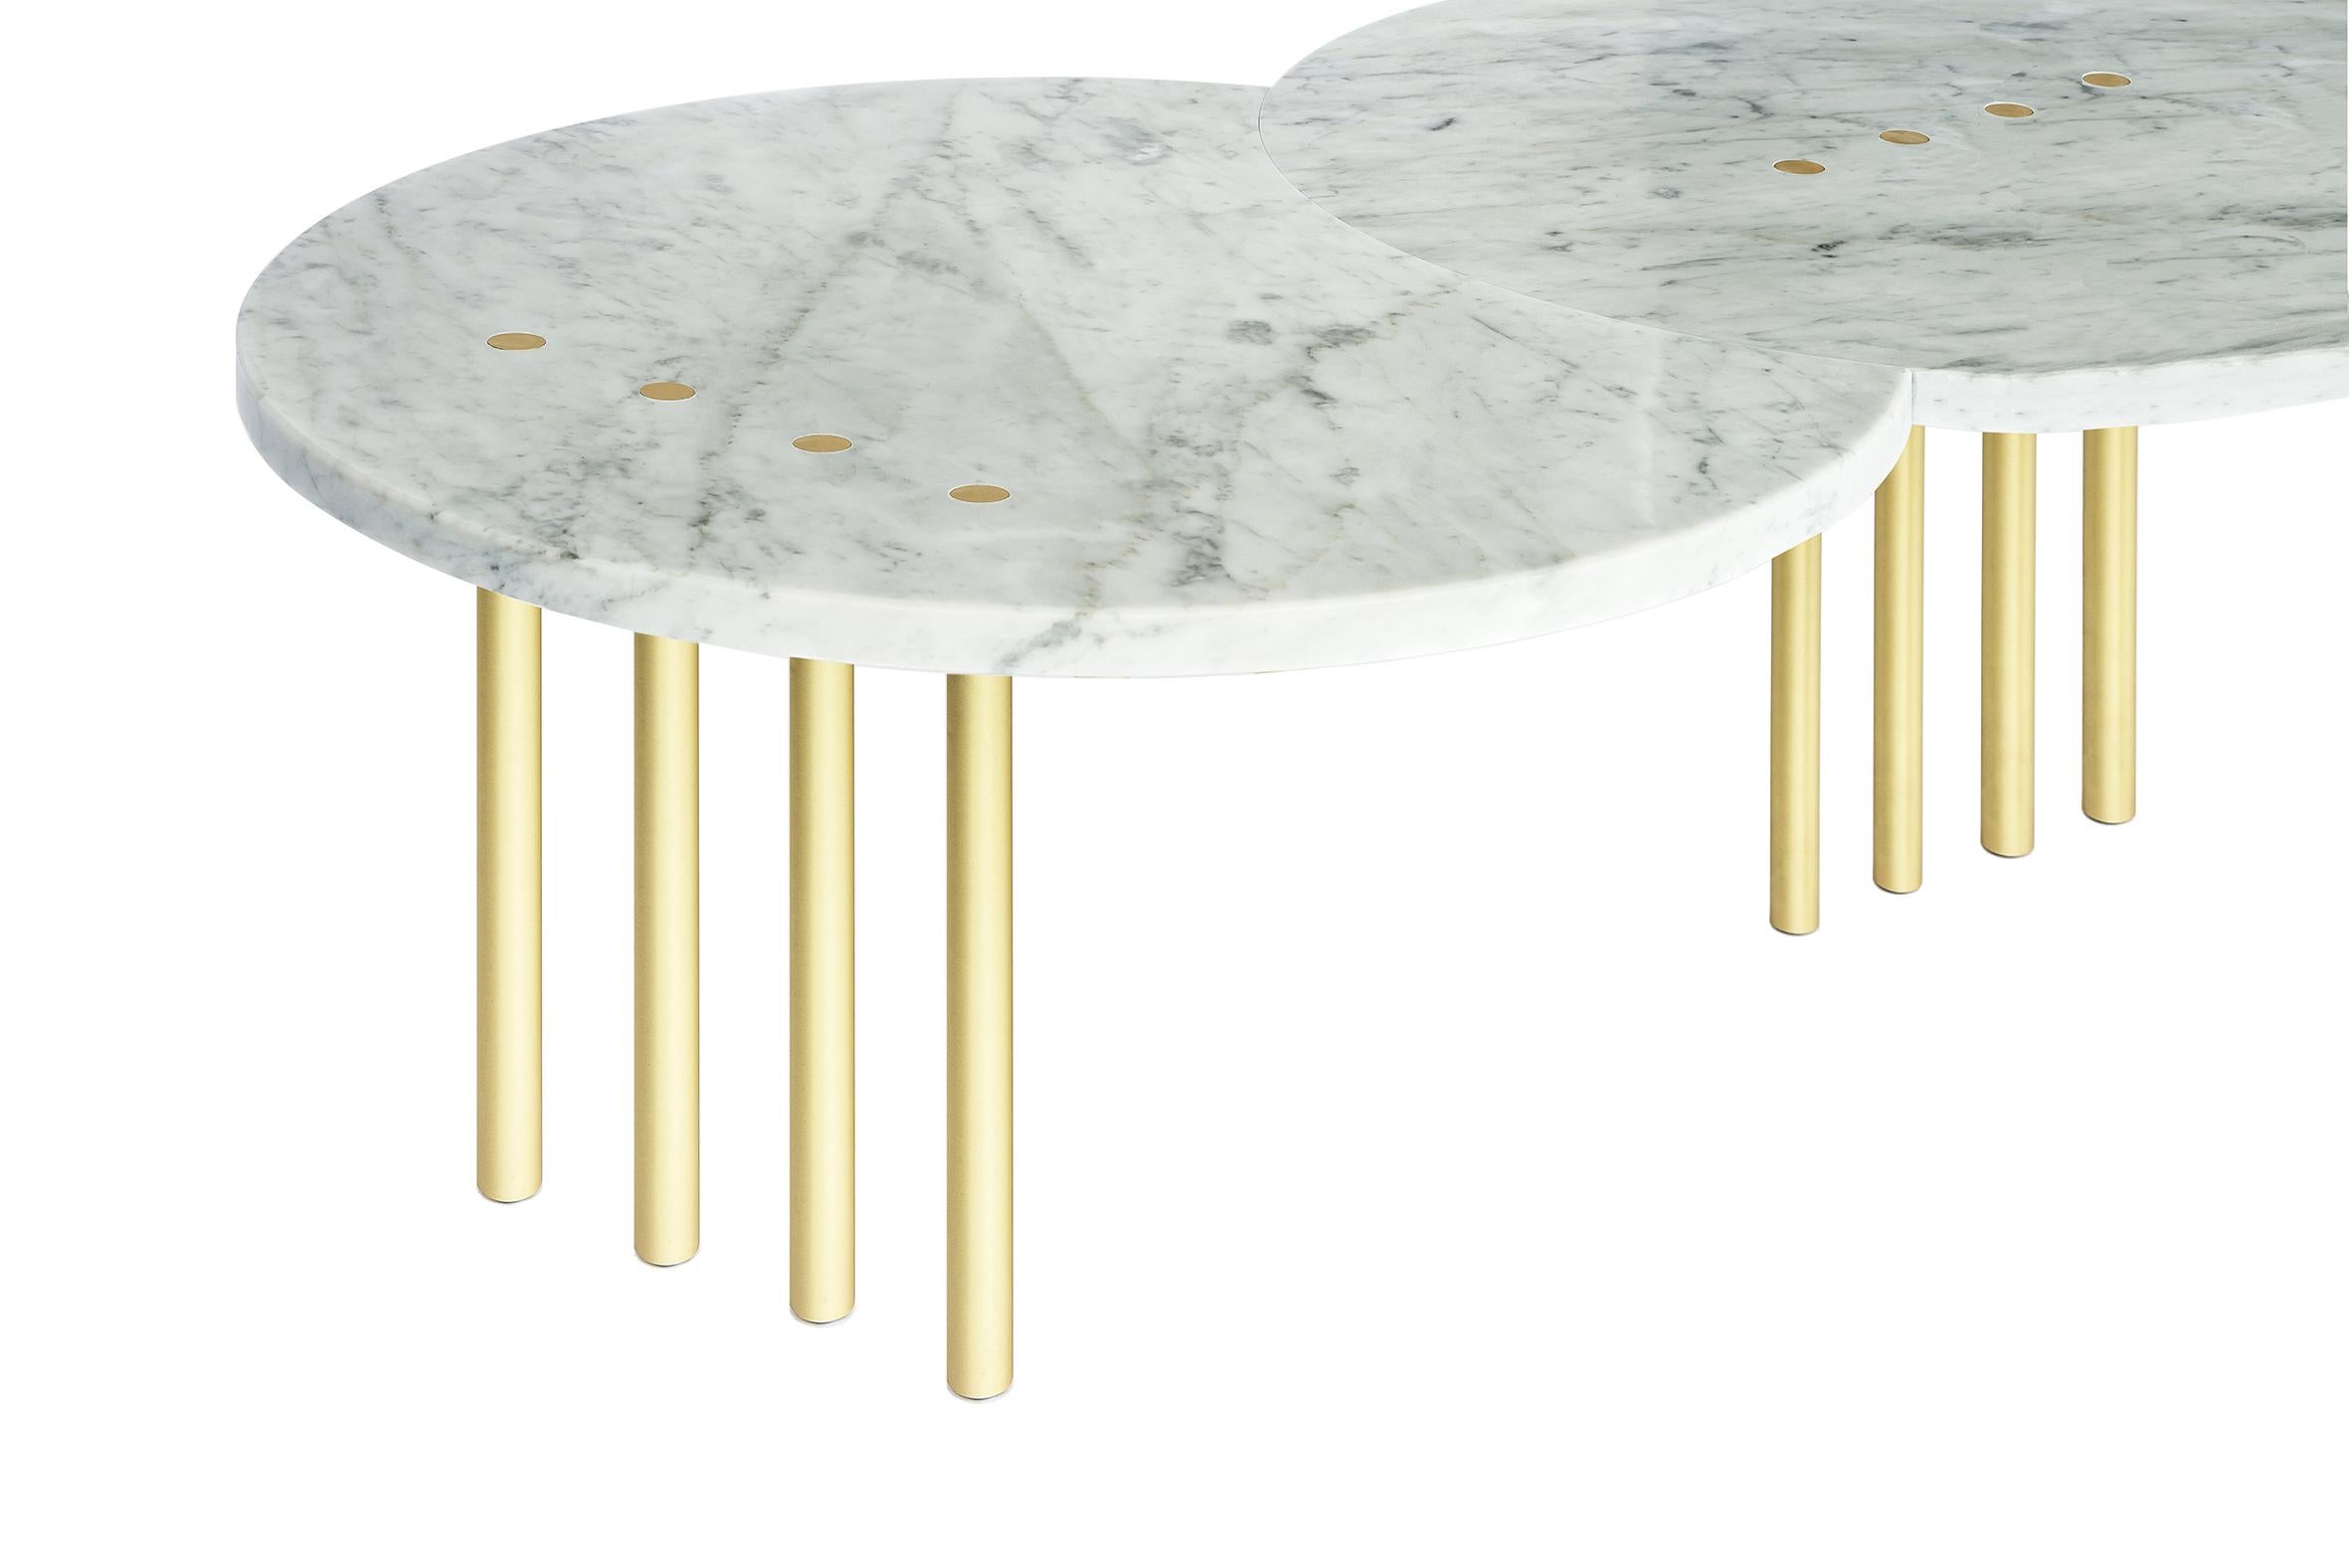 Expanding on the ?Eclipse? table series, this coffee table features a moon form of white Carrera marble. 

The slim tubular legs are made of solid brushed brass.